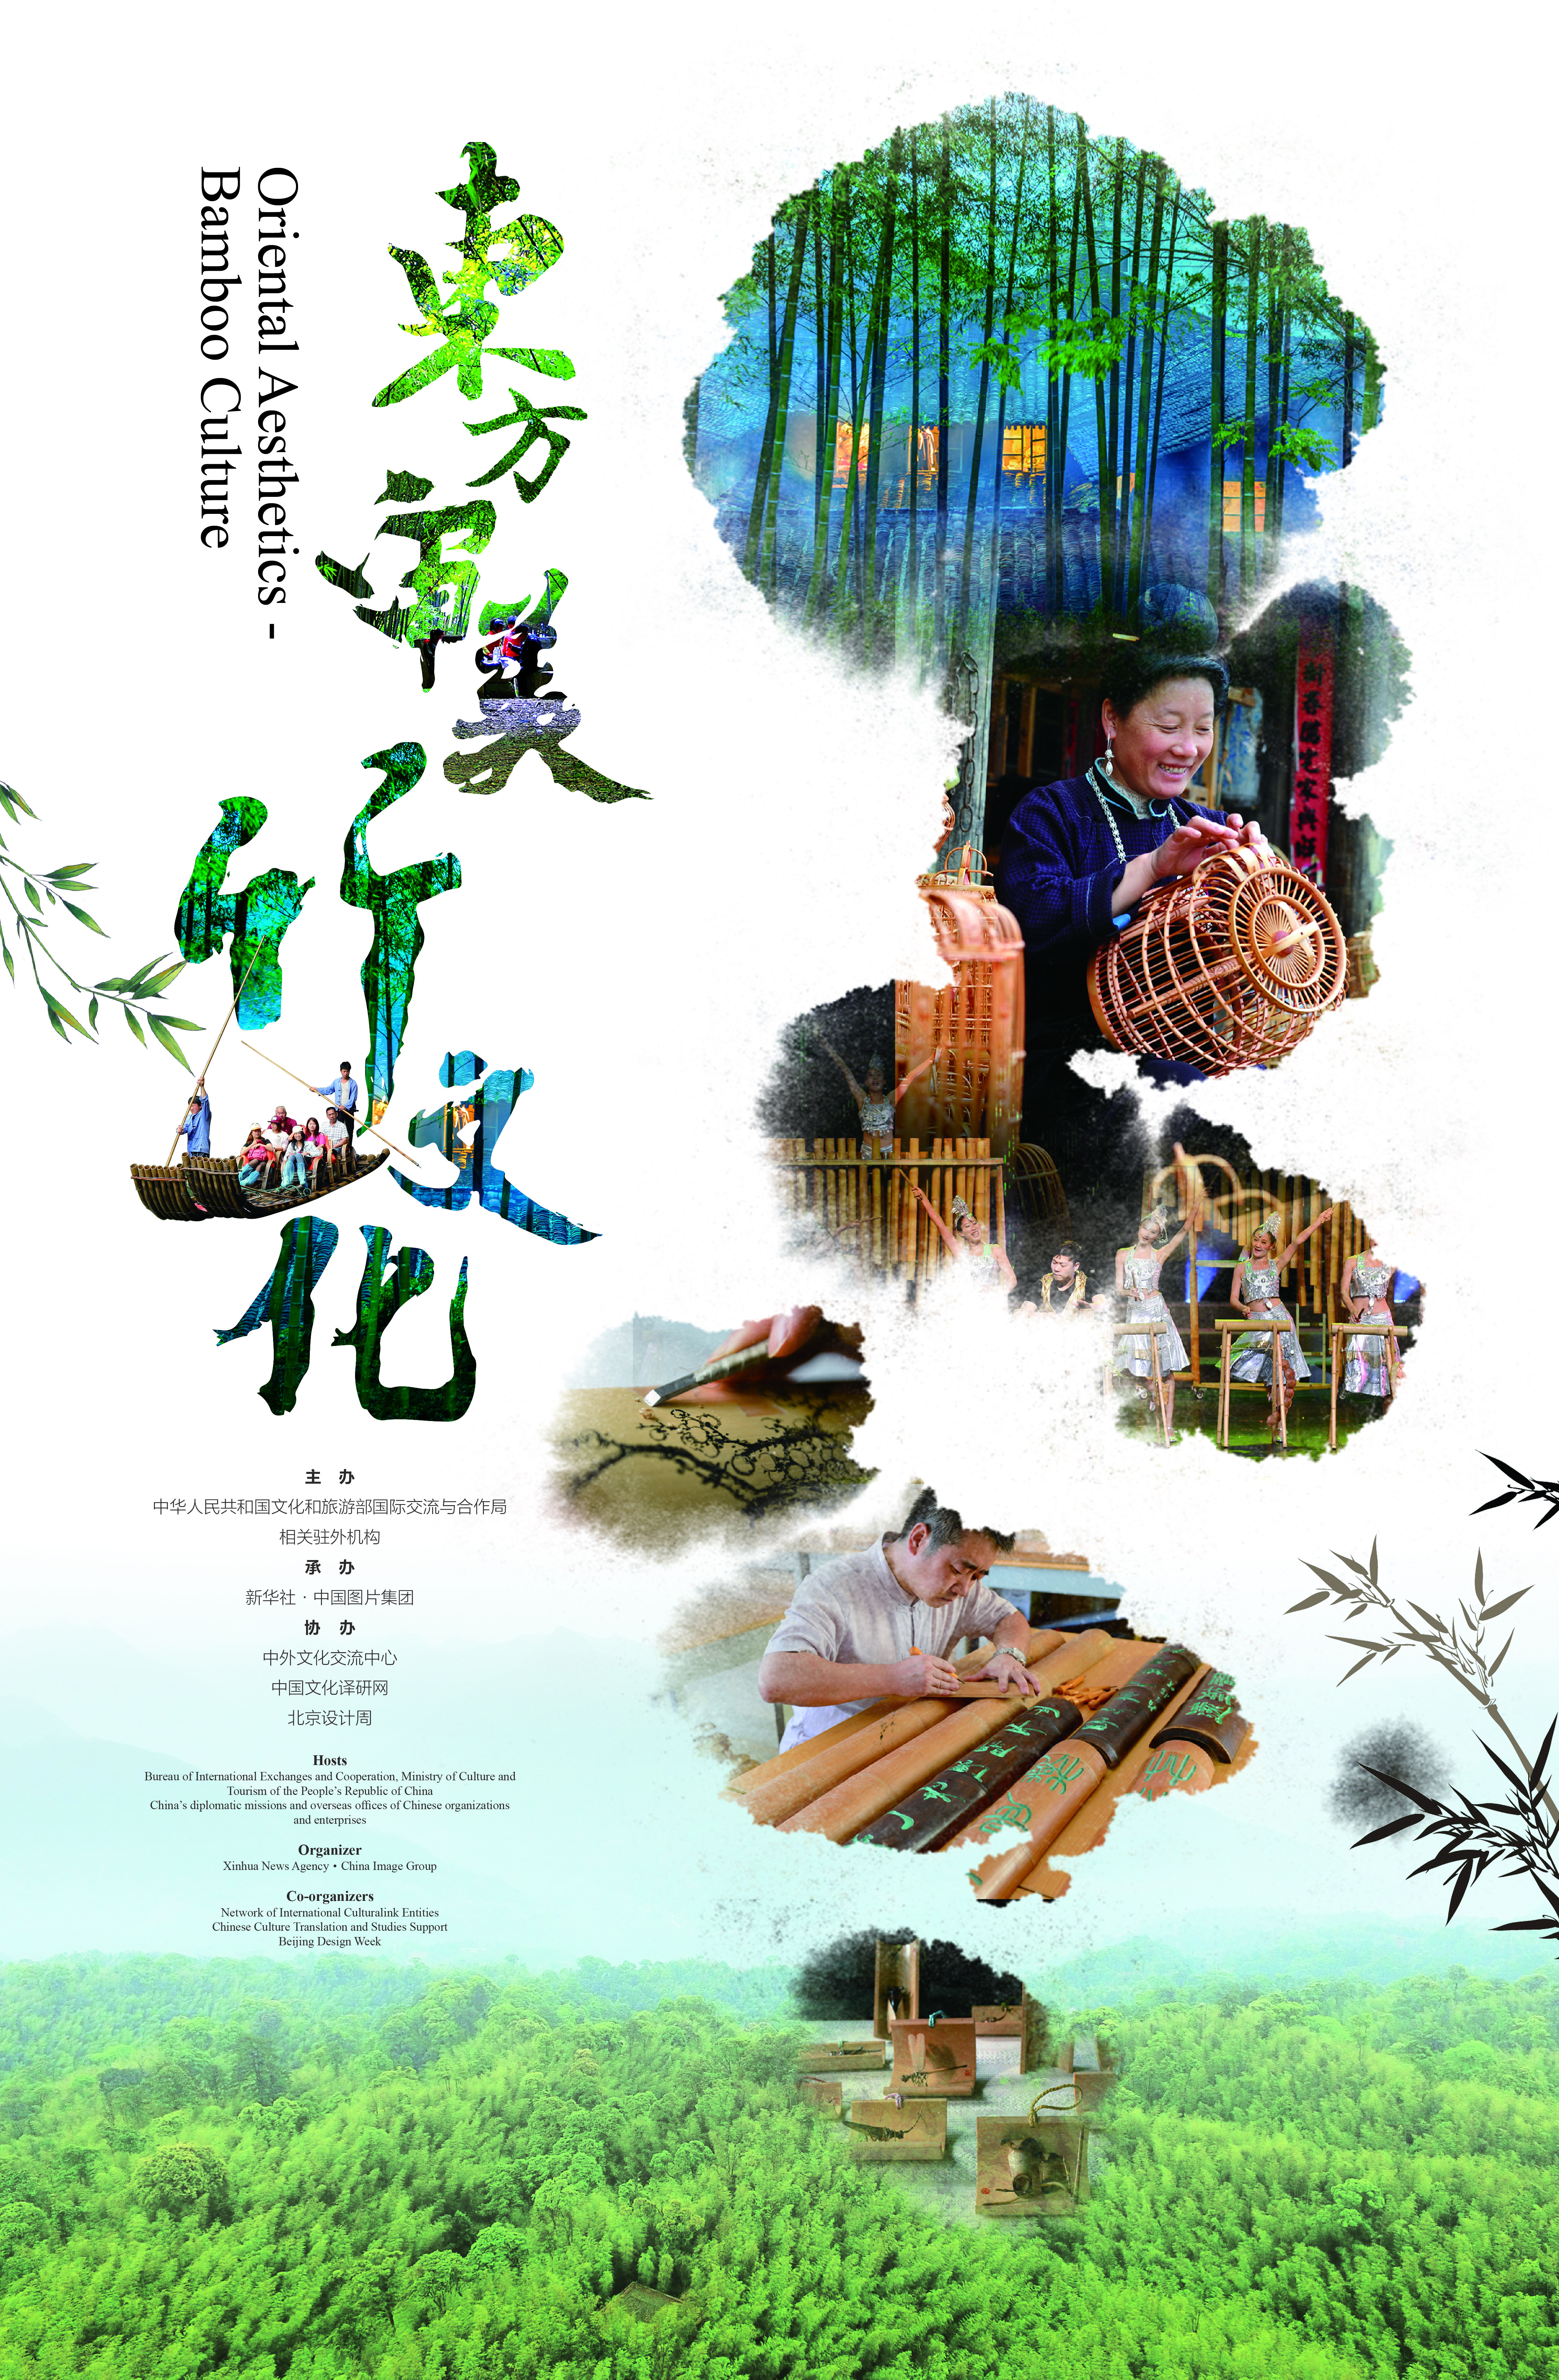 Visiting China Online – Bamboo Culture